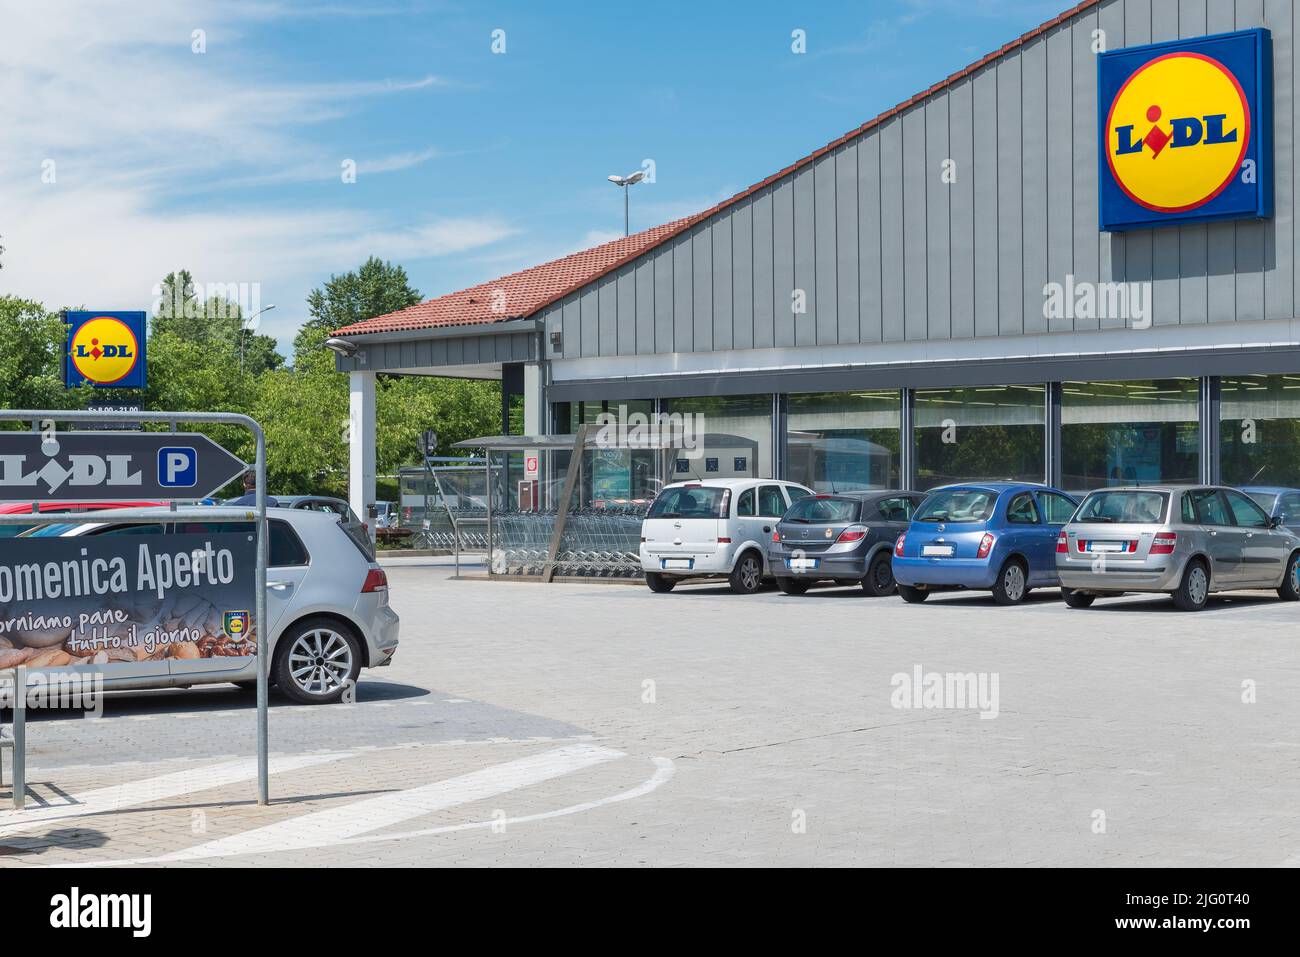 Lidl supermarket. Lidl Stiftung & Co. KG is a German global discount supermarket chain with over 10,000 stores across Europe and the United States. Stock Photo